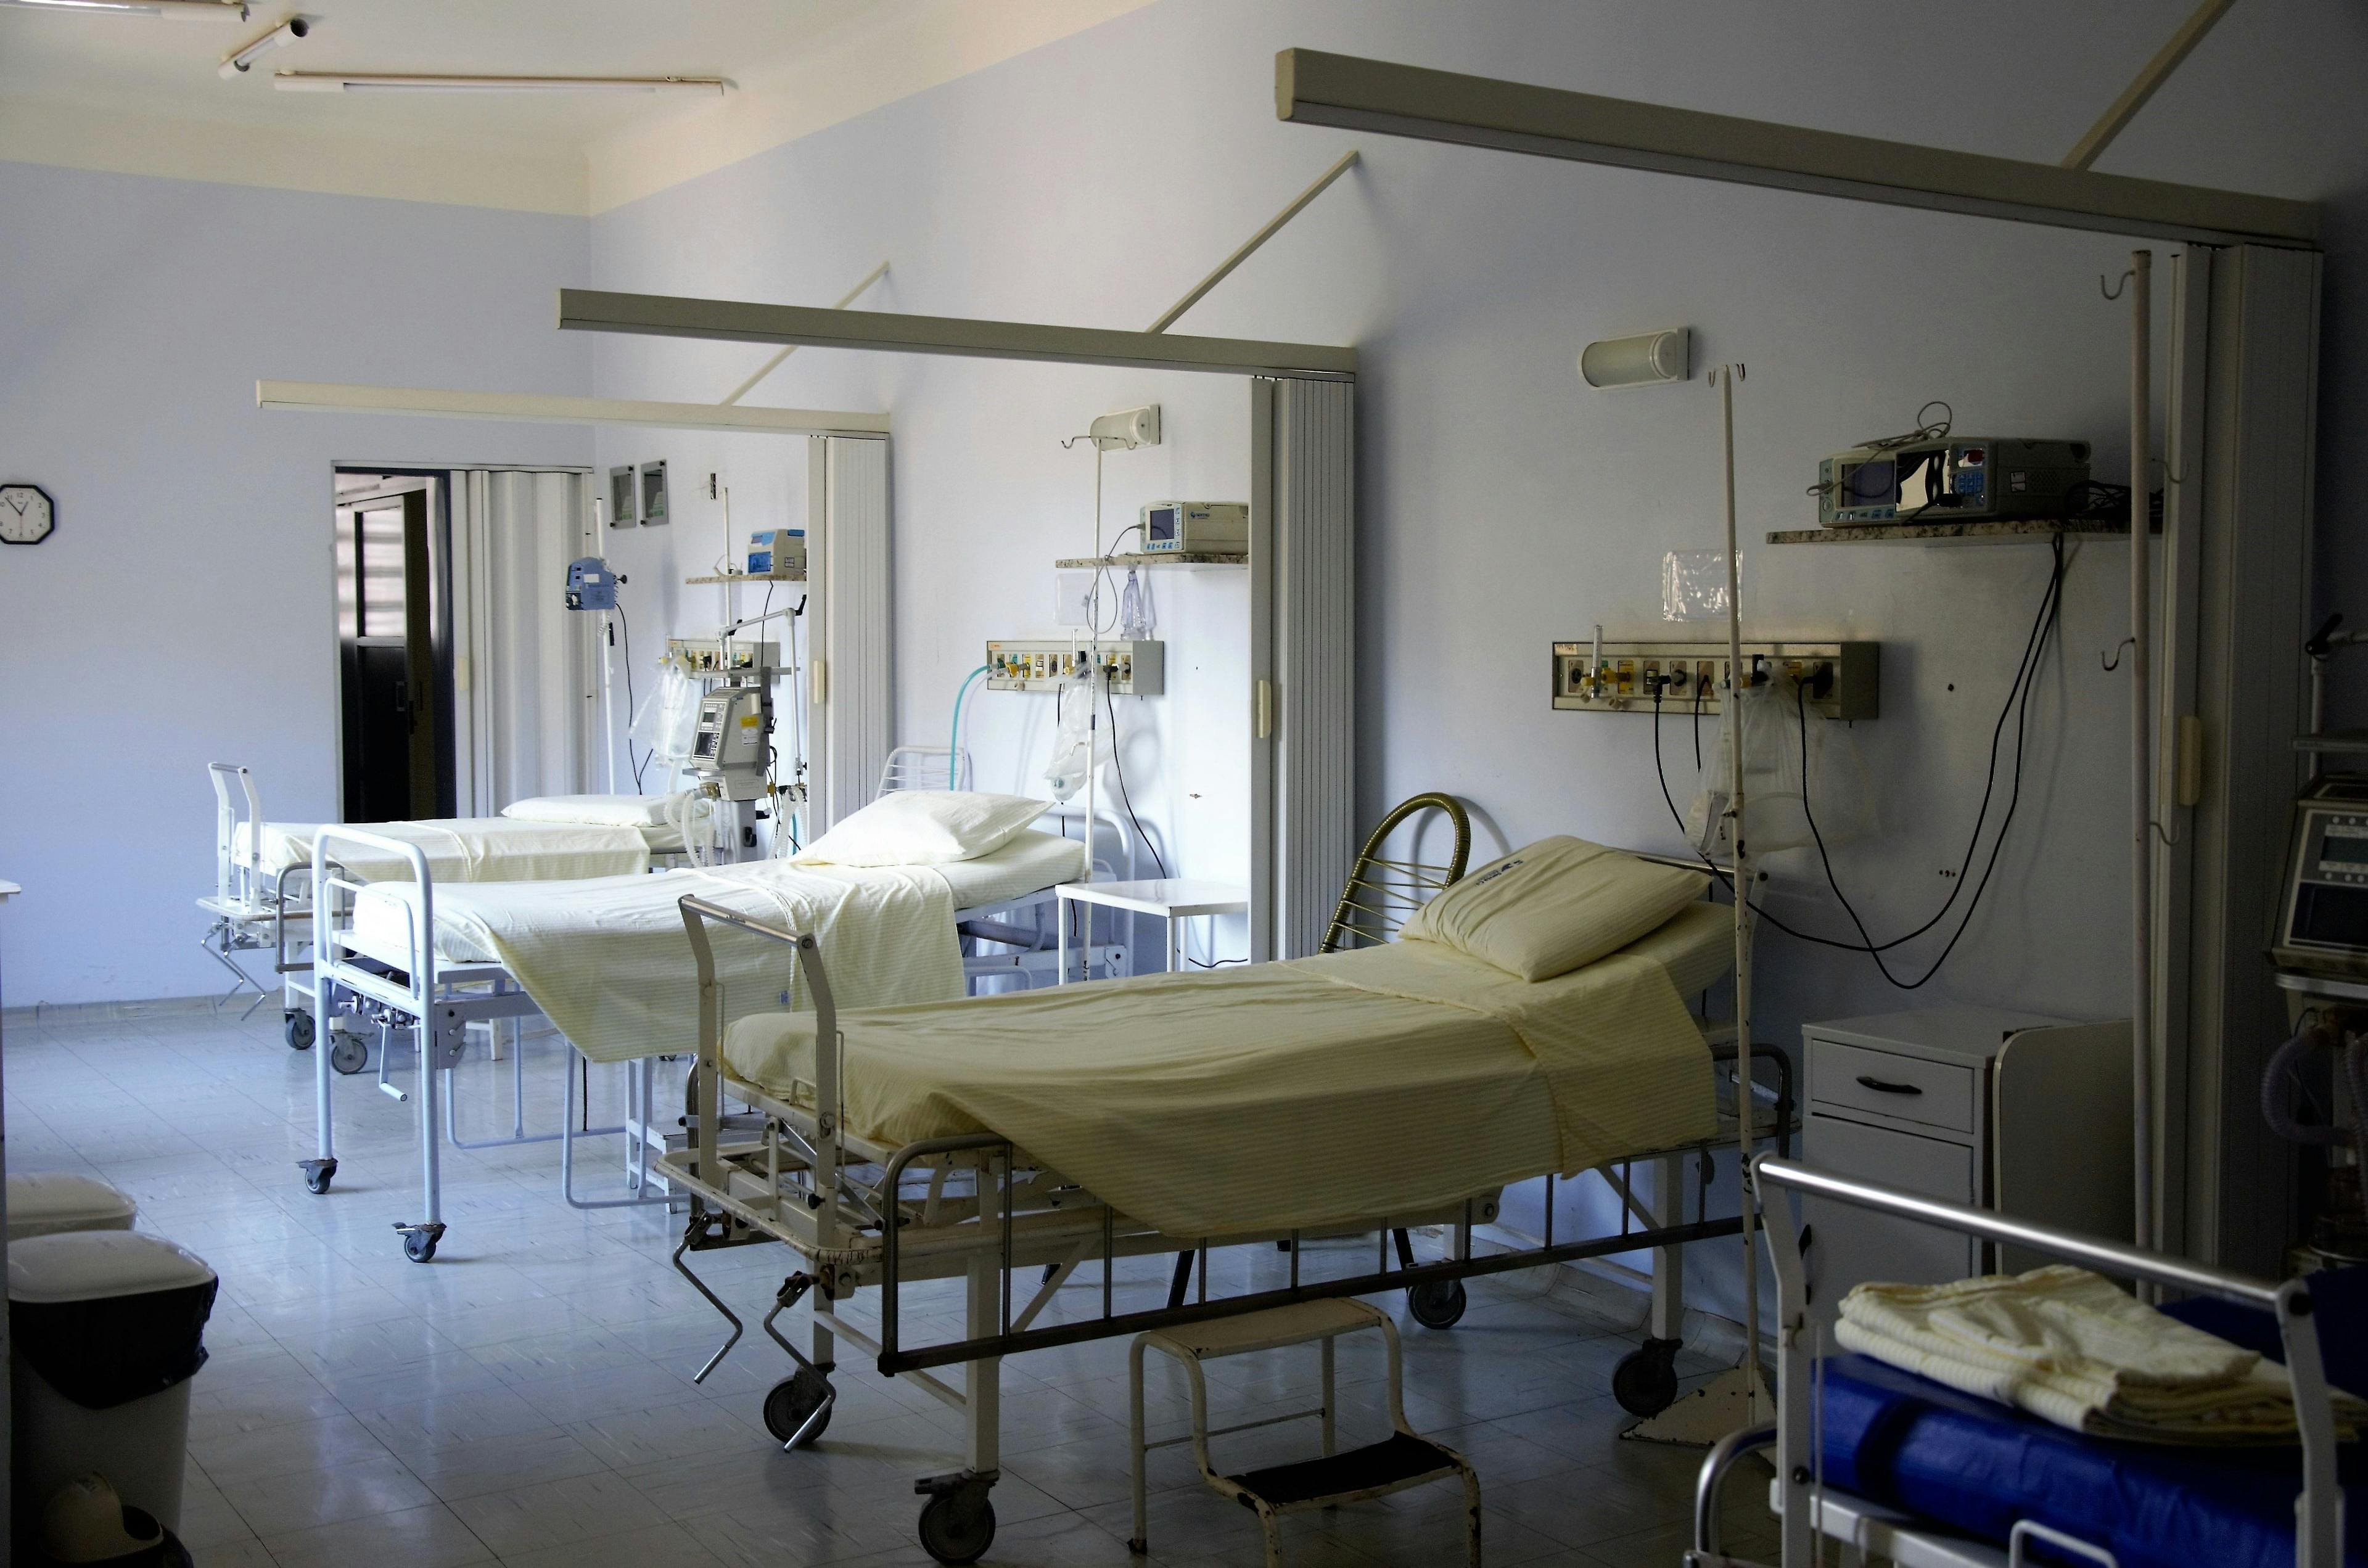 Hospitals With Higher Antimicrobial Use Have Larger C Difficile Issues